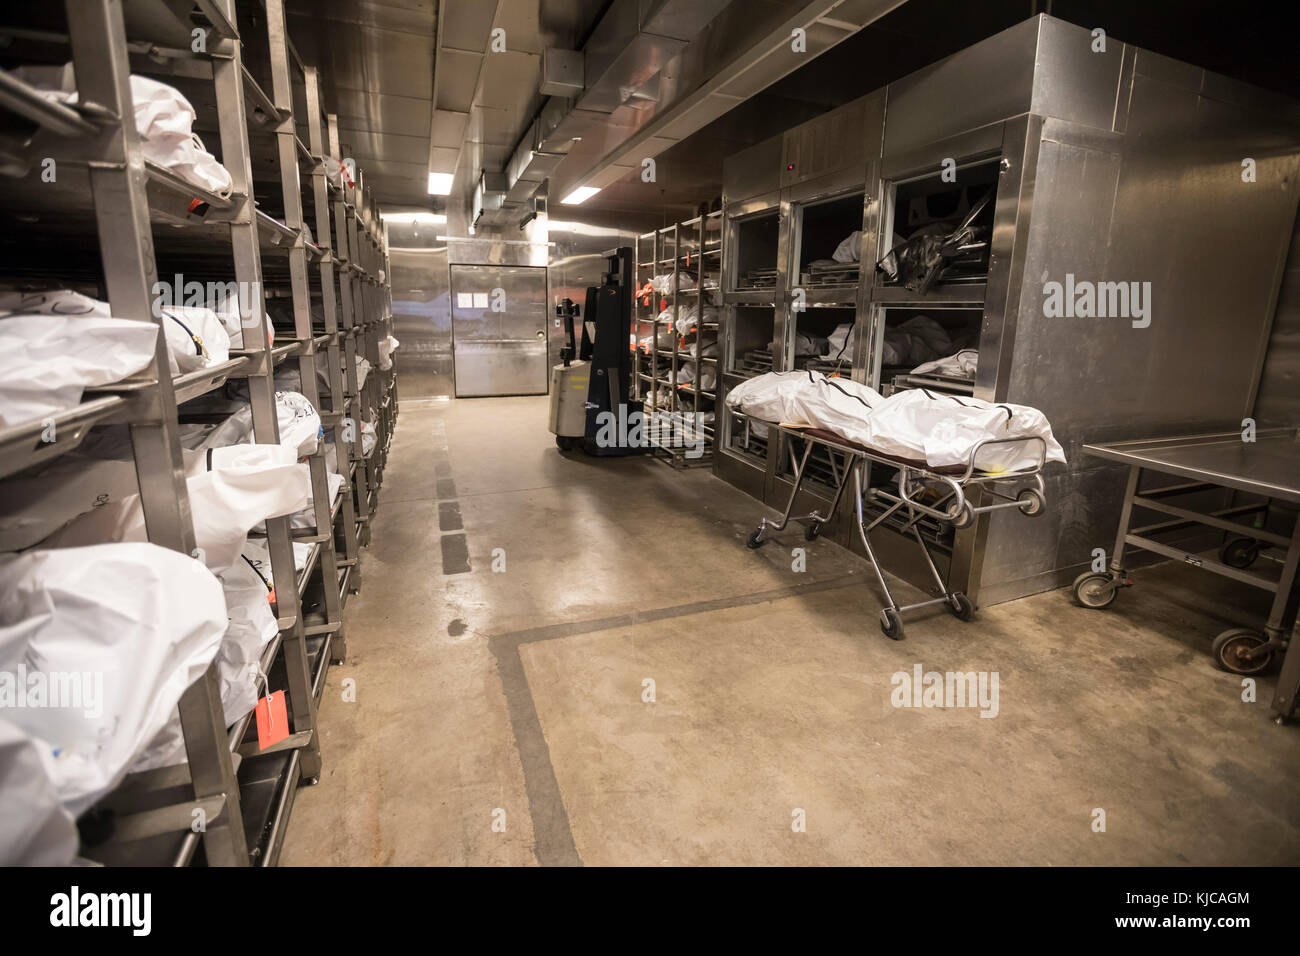 Tucson, Arizona - The morgue at the office of the Pima County Medical Examiner. Many of the corpses stored here are of unidentified migrants who died  Stock Photo